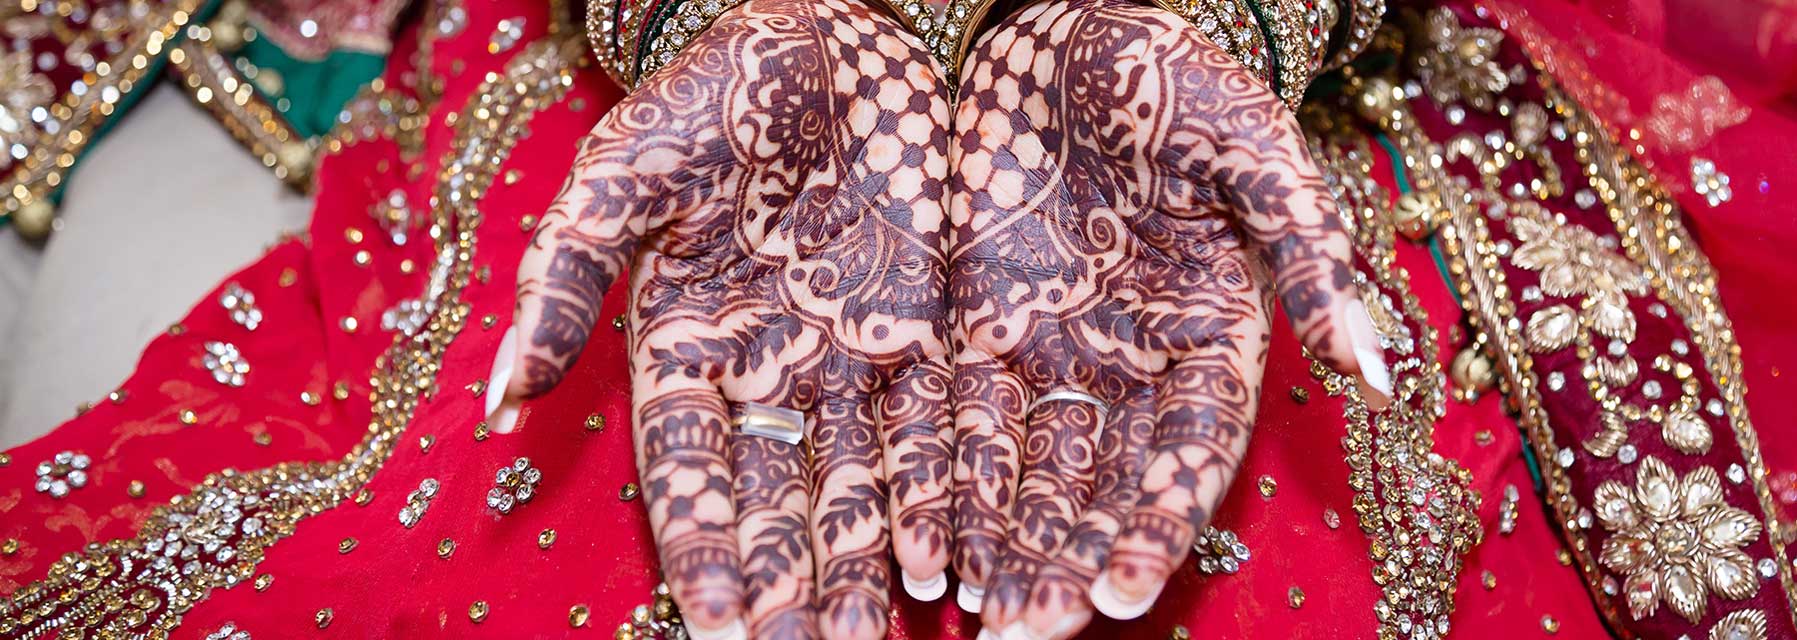 hands with henna tattoos against a bejeweled background